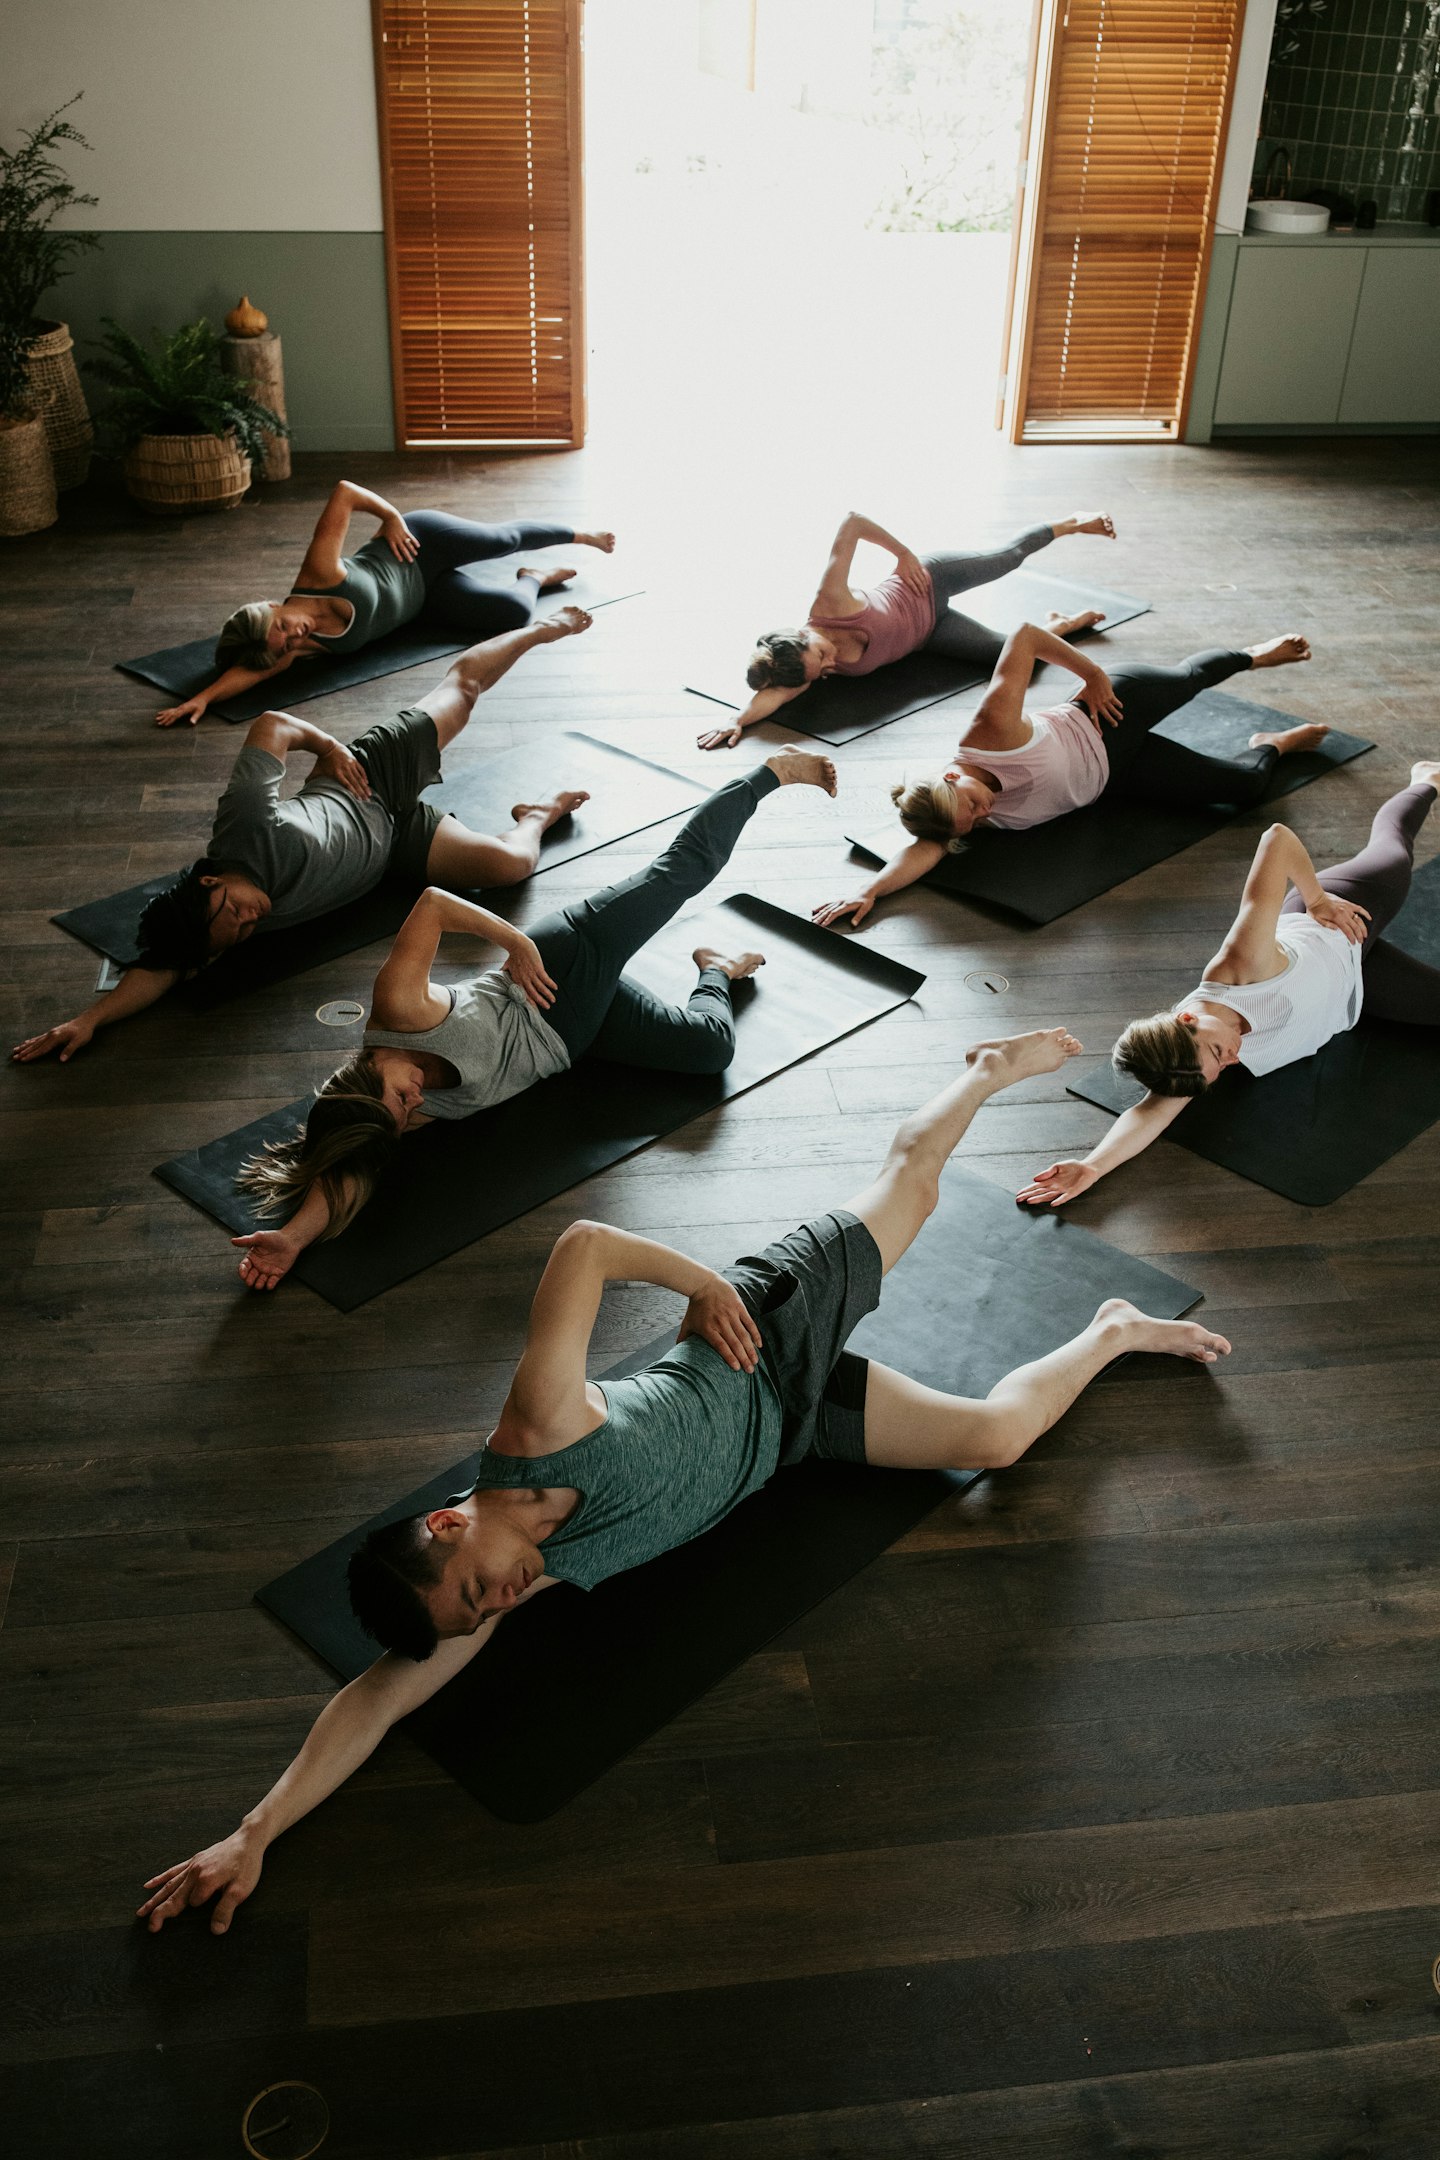 group of seven adults on yoga mats doing Pilates in indoor space